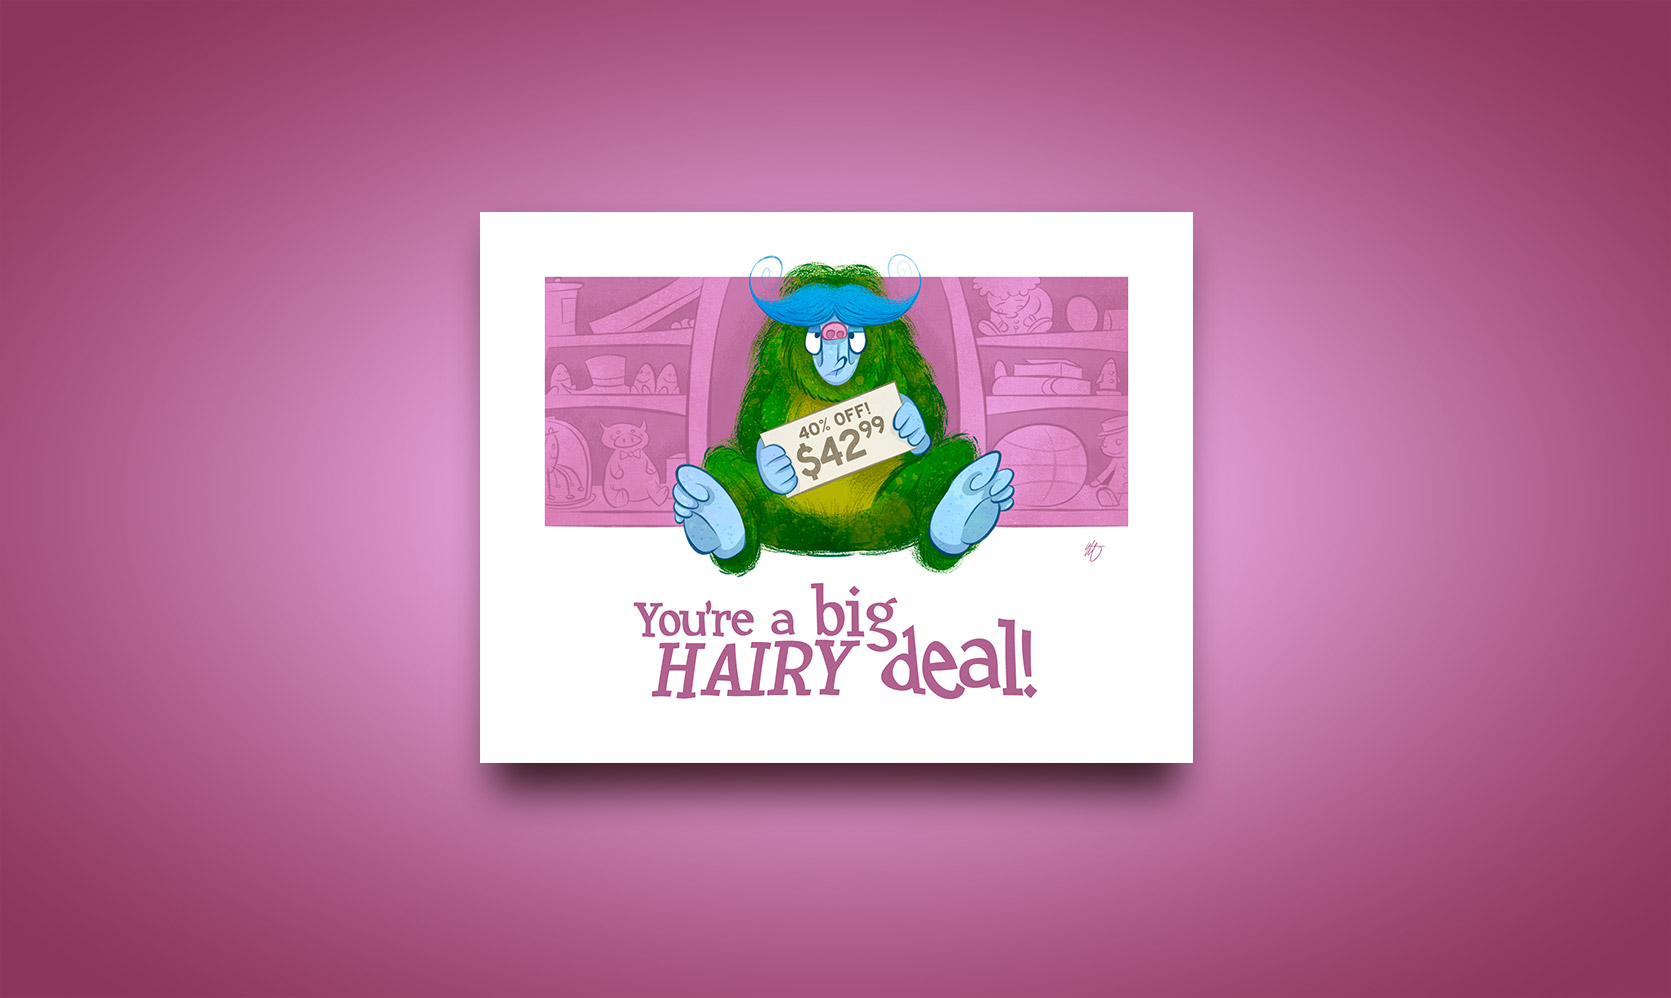 You're a big hairy deal! – Greeting card design available on Etsy